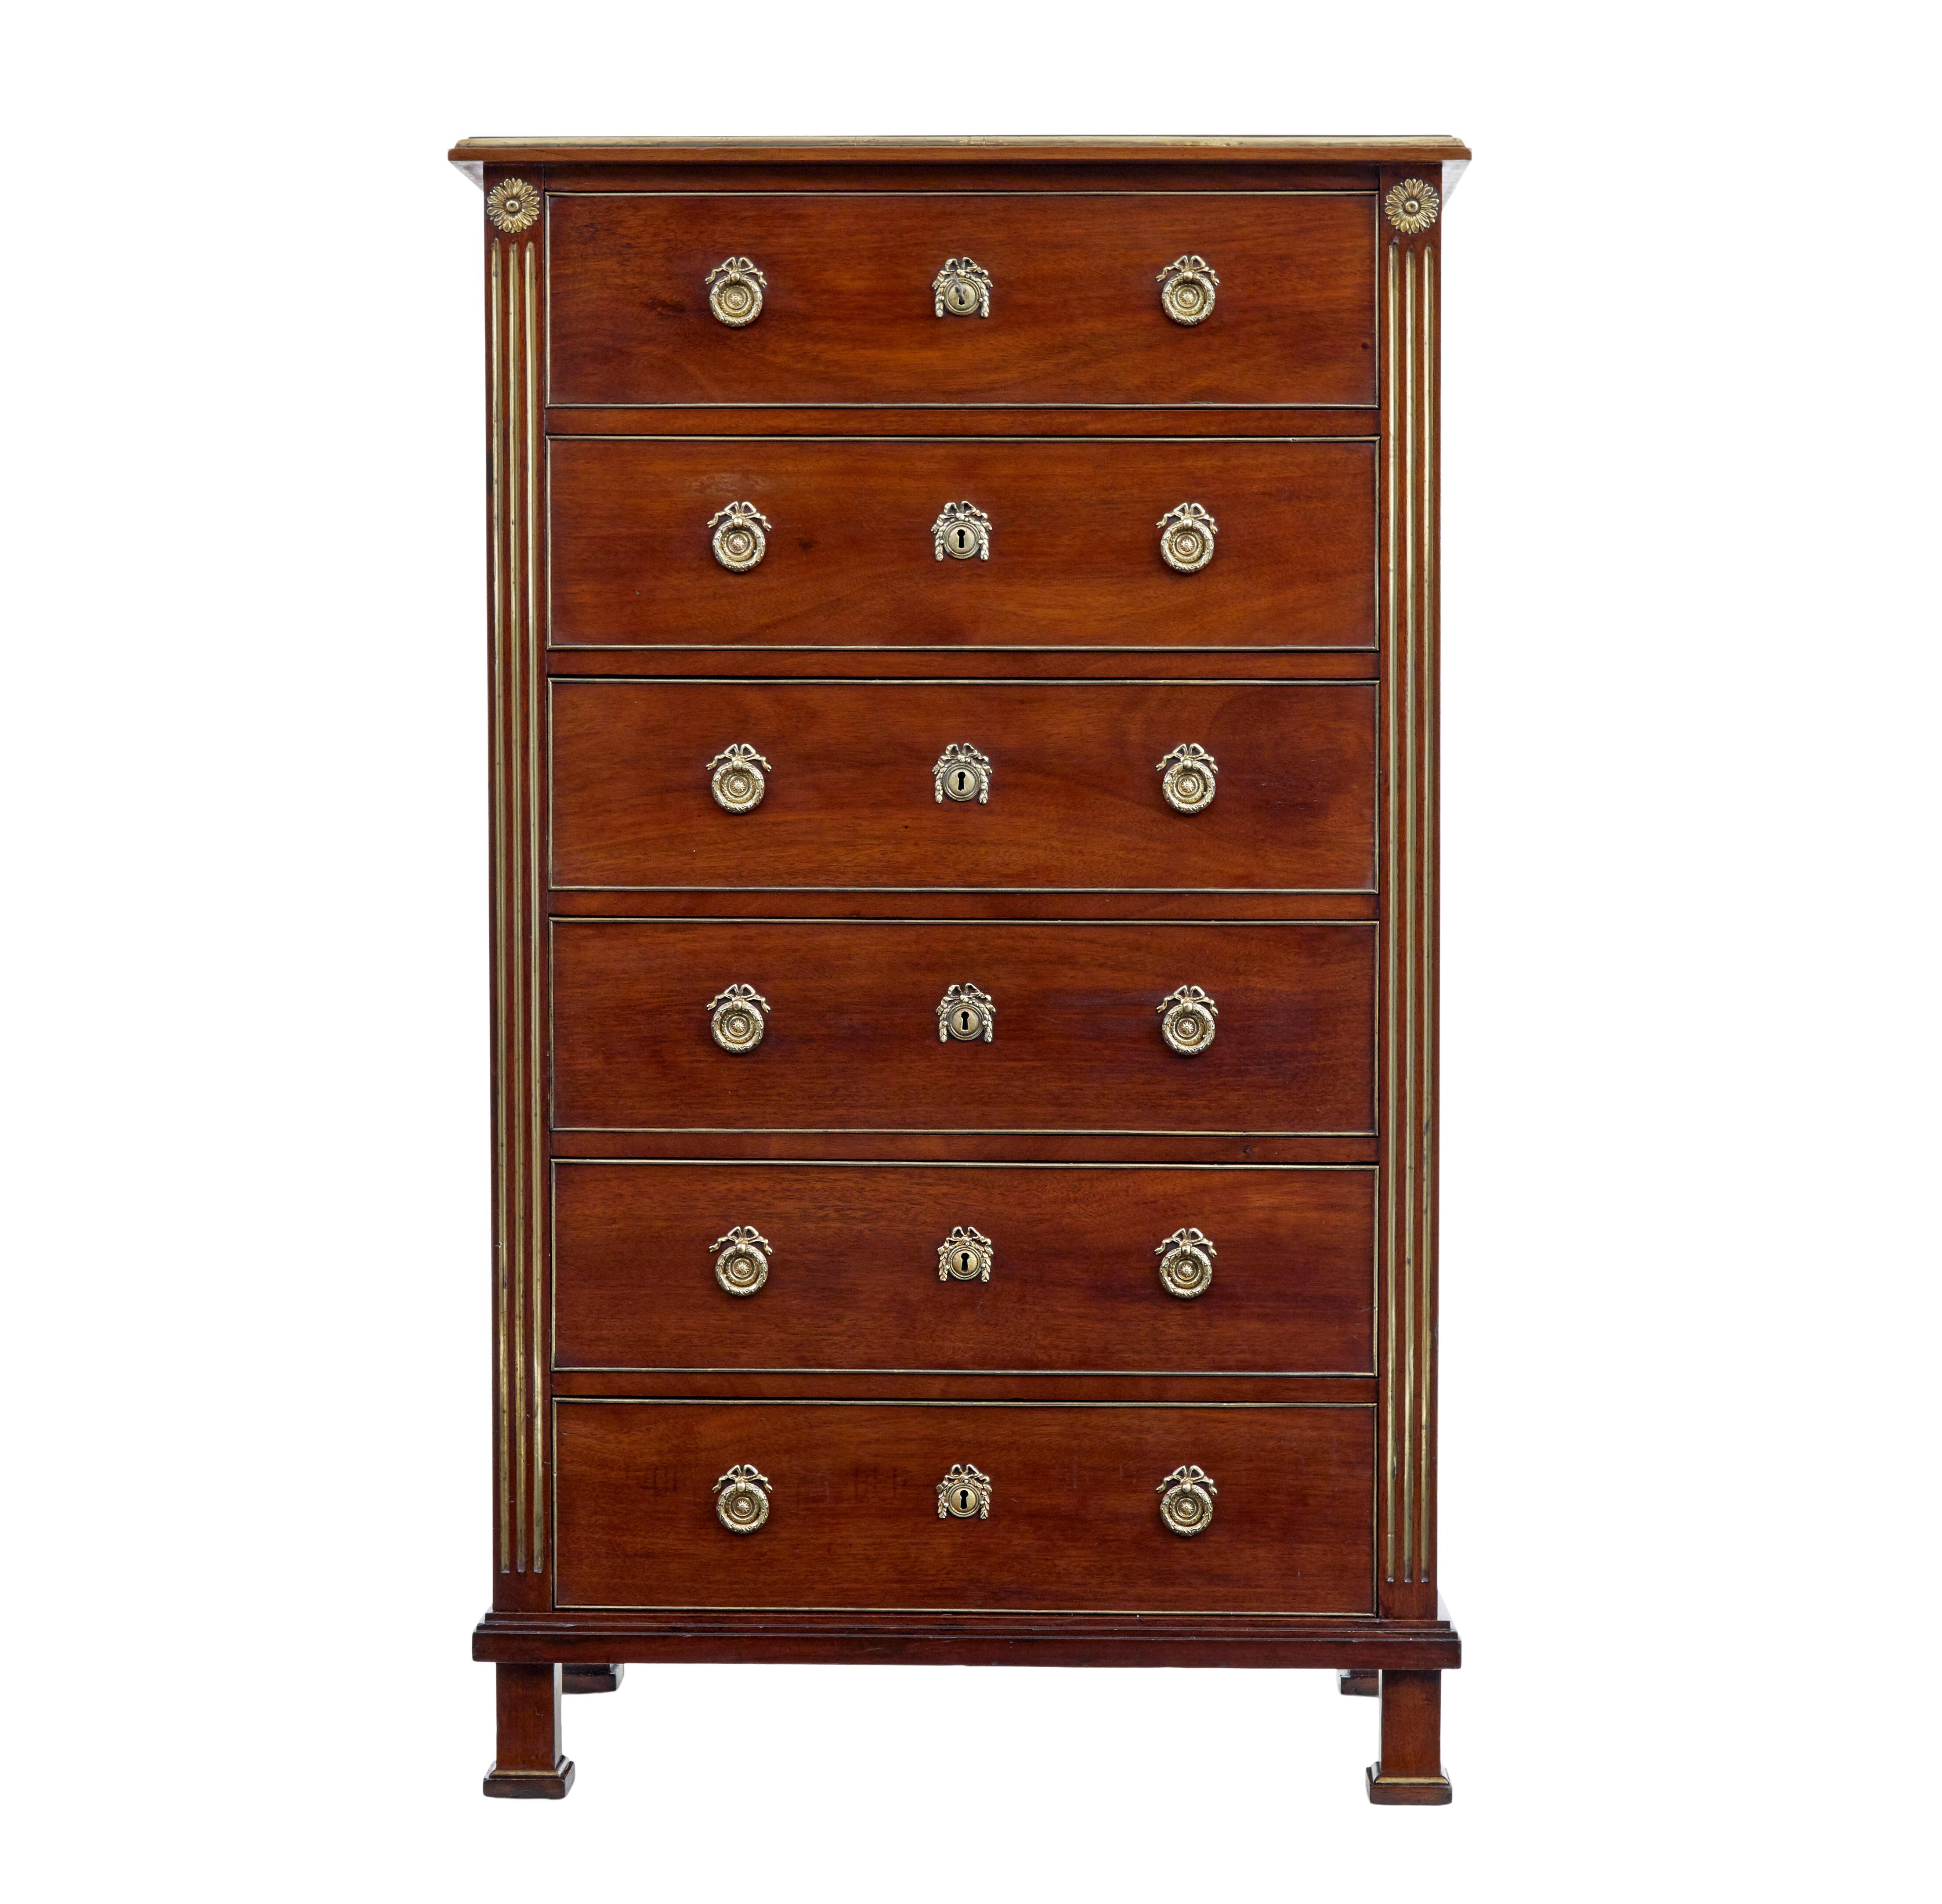 19th century directoire influenced mahogany tall chest of drawers, circa 1890.

Fine quality tall chest in the directoire style. Fitted with 6 drawers of equal proportions and detailed with cock beaded edging that has been carried out in brass.